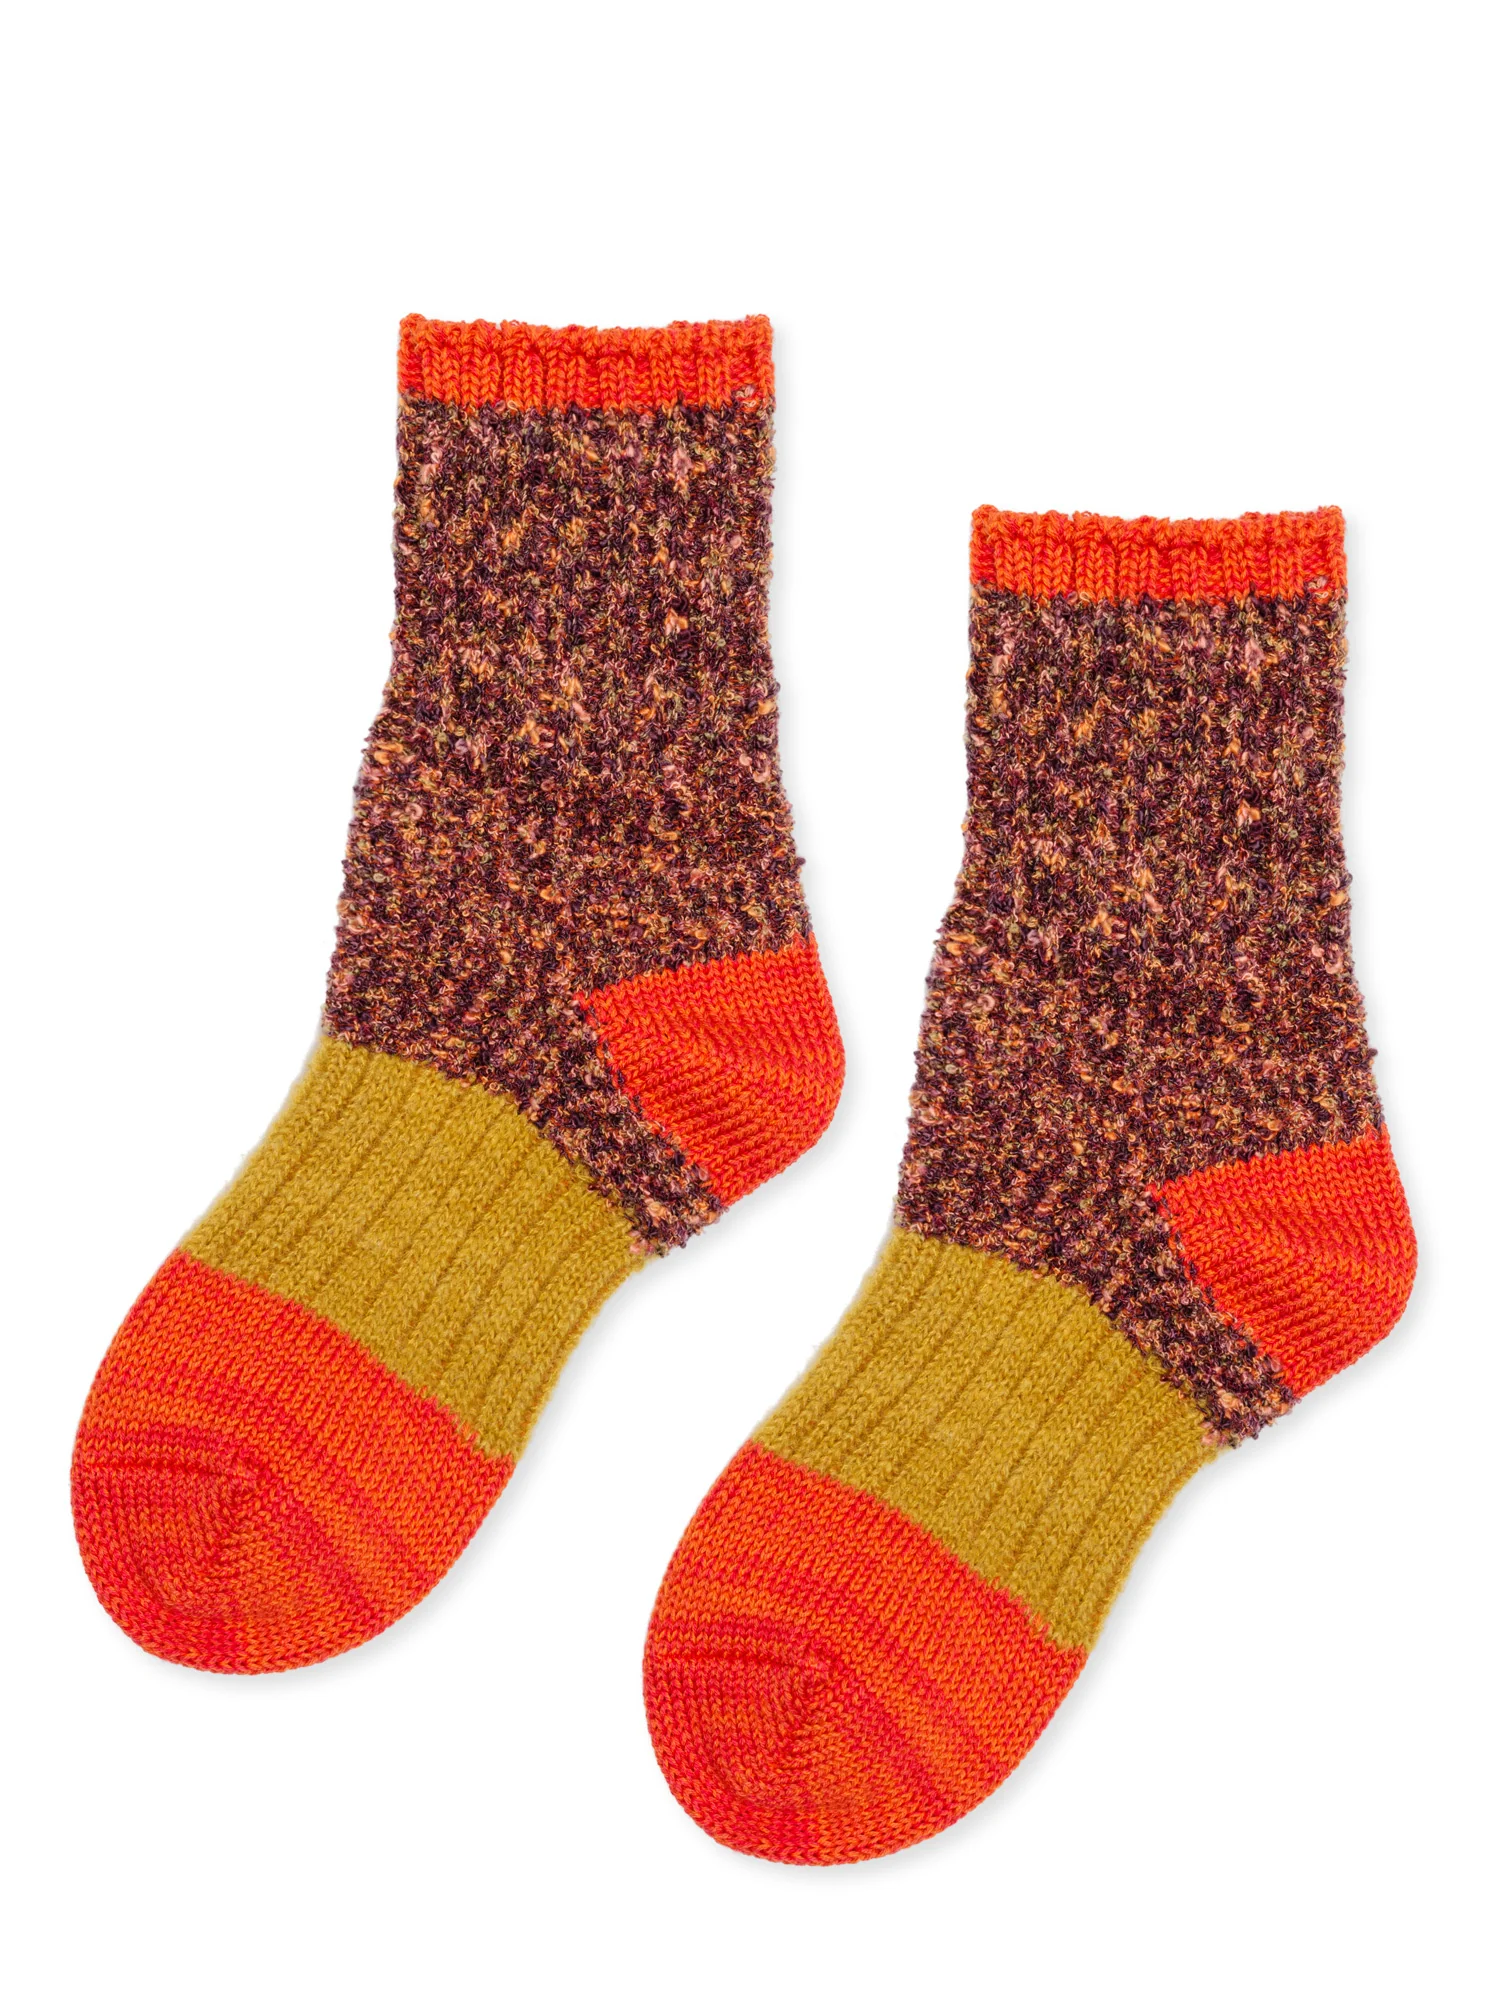 colorblocked socks made in alternating colors and thicknesses. 